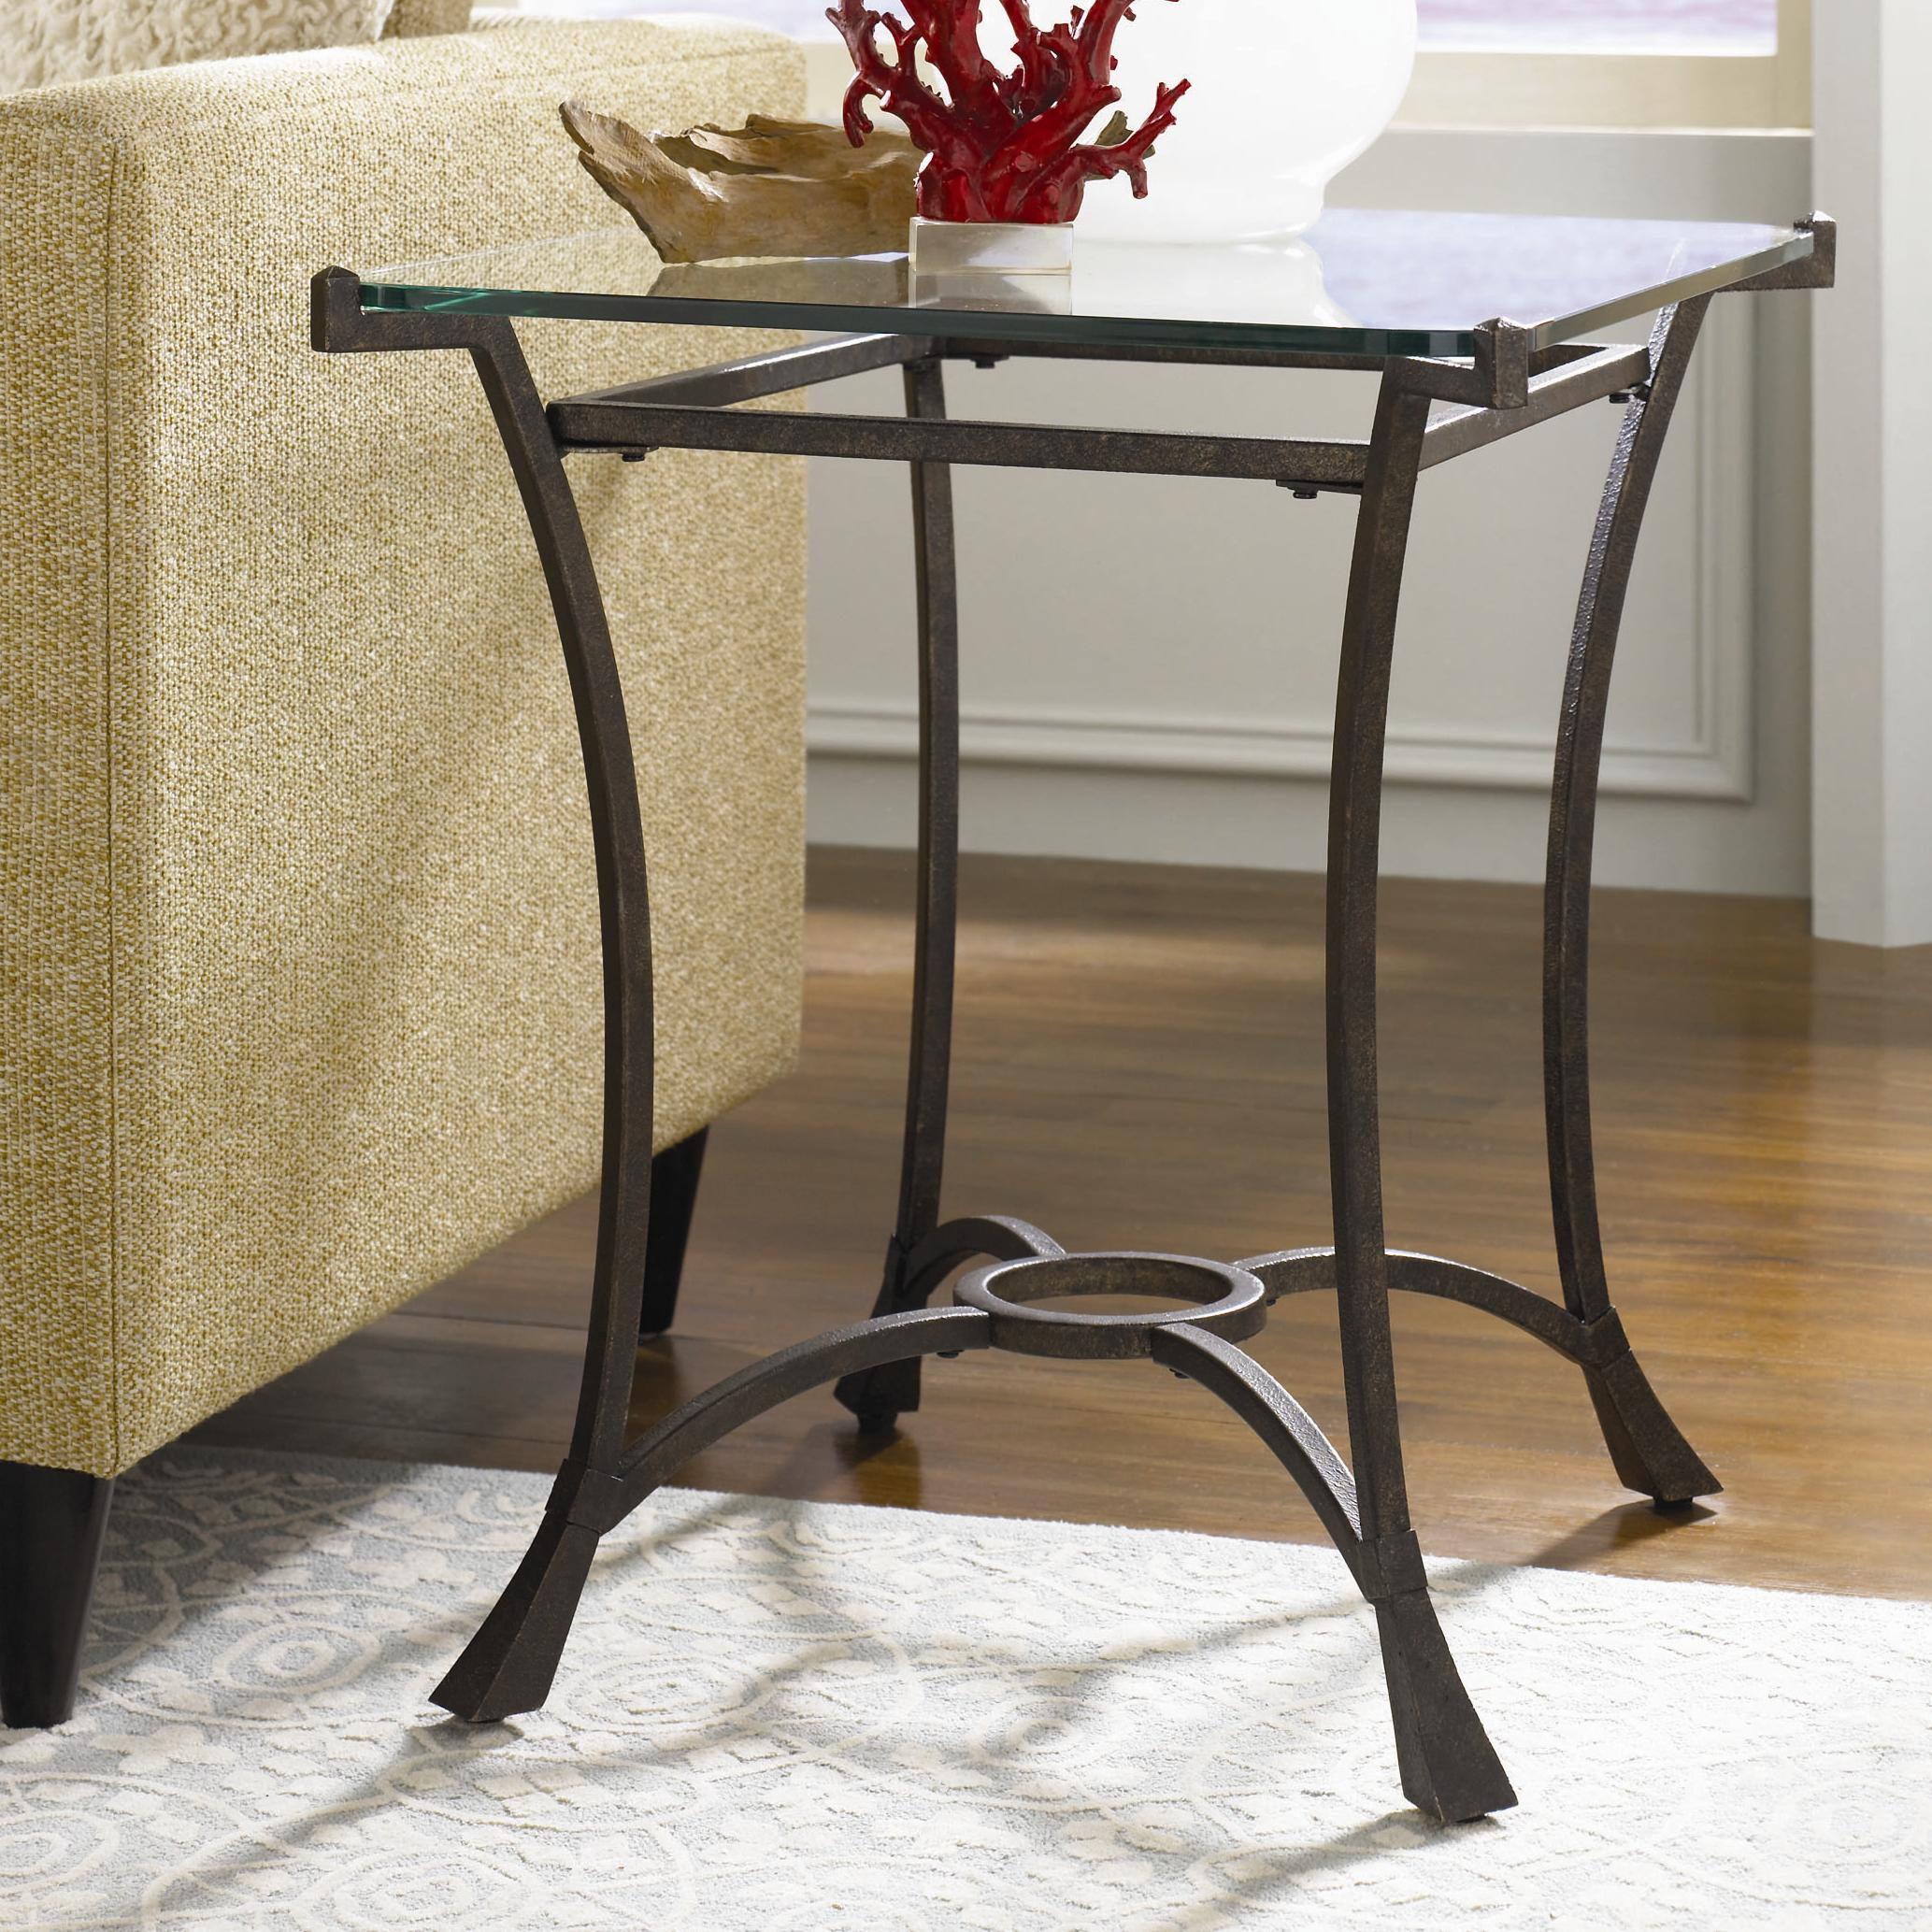 hammary sutton contemporary metal rectangular end table with glass products color black top small kitchen wood legs unique conference room tables distressed night oak coffee set